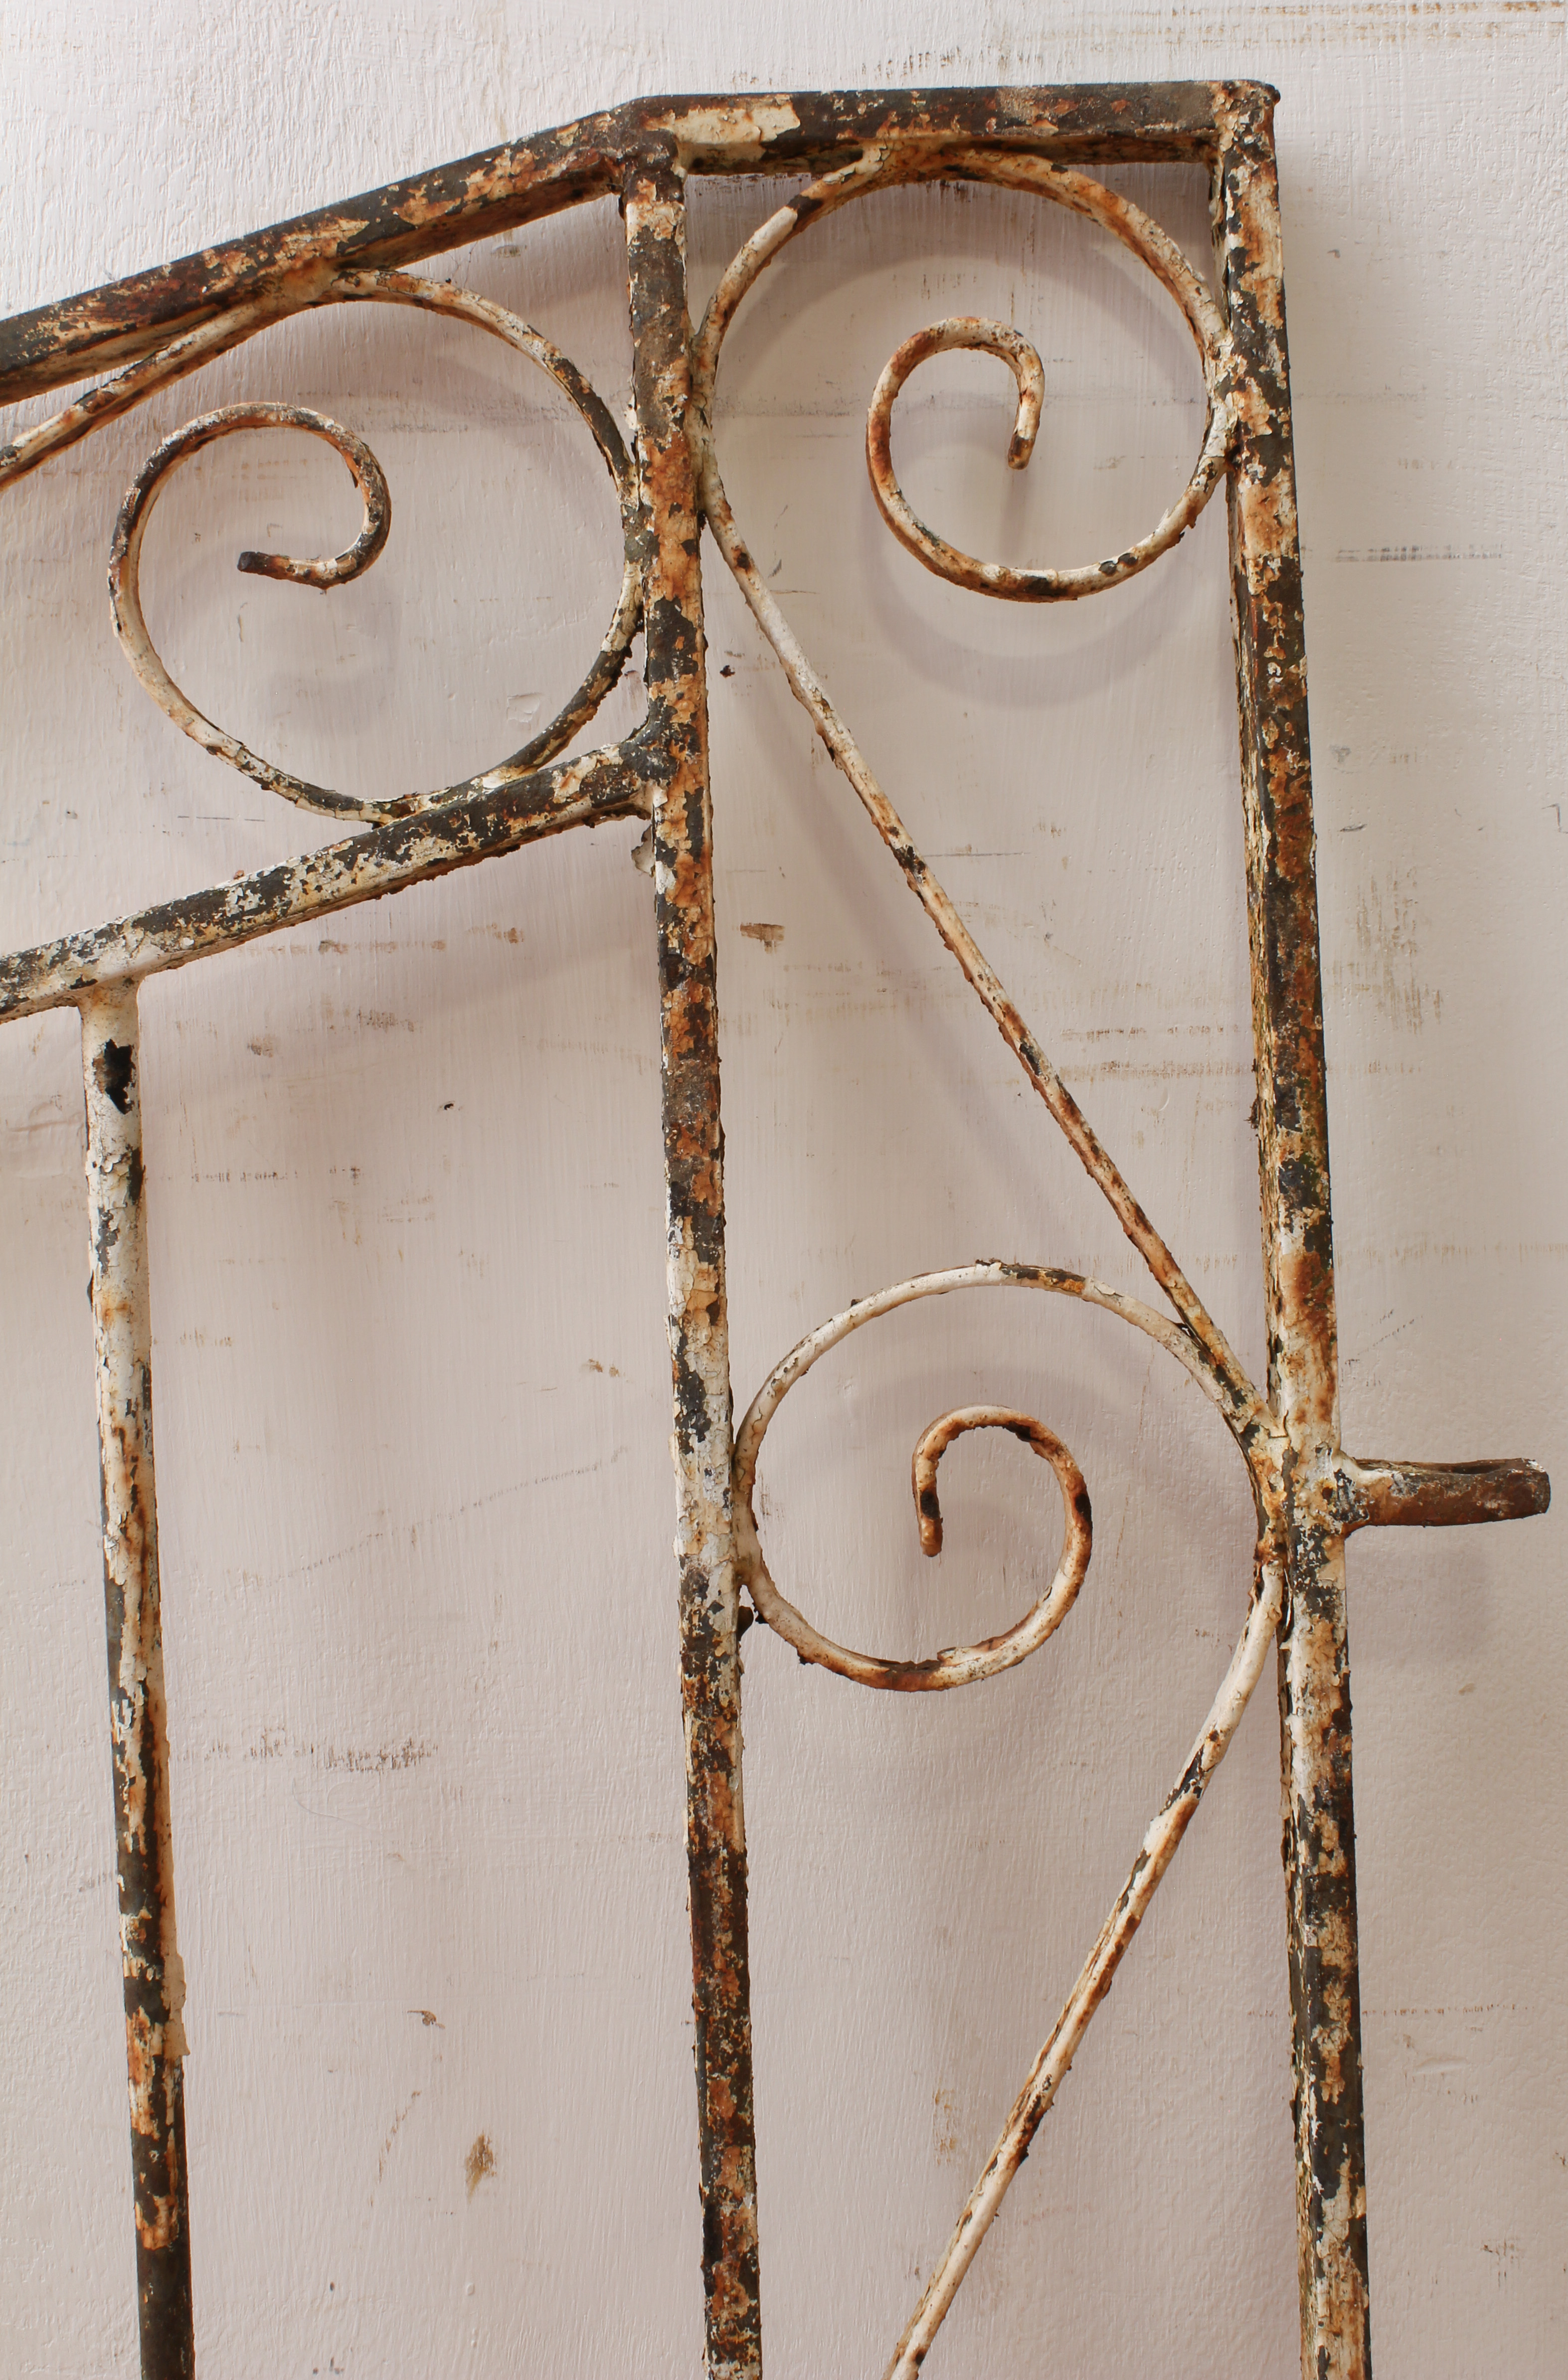 A set of wrought iron driveway gates (271 x 92 cm) - Image 7 of 7